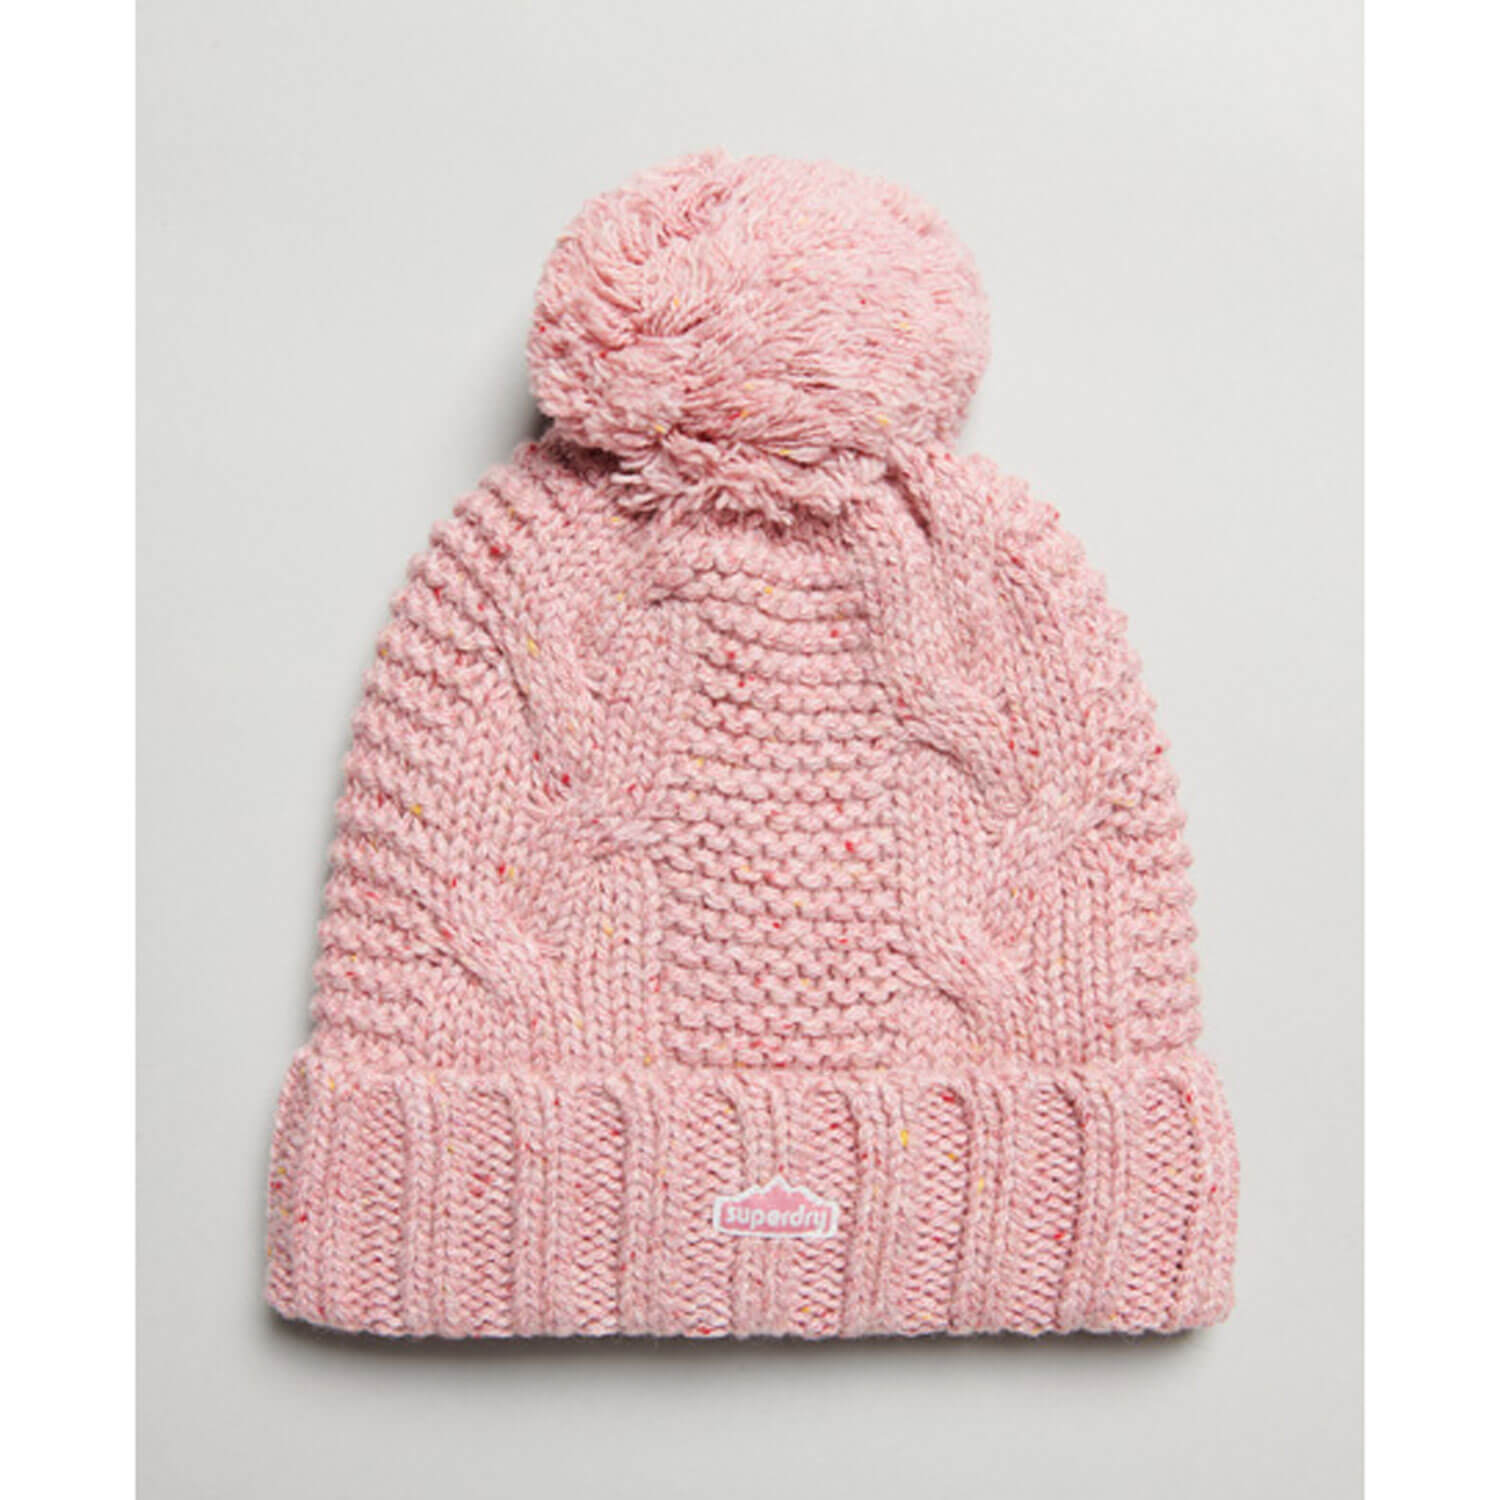 Superdry Cable Knit Bobble Beanie - Rose 1 Shaws Department Stores